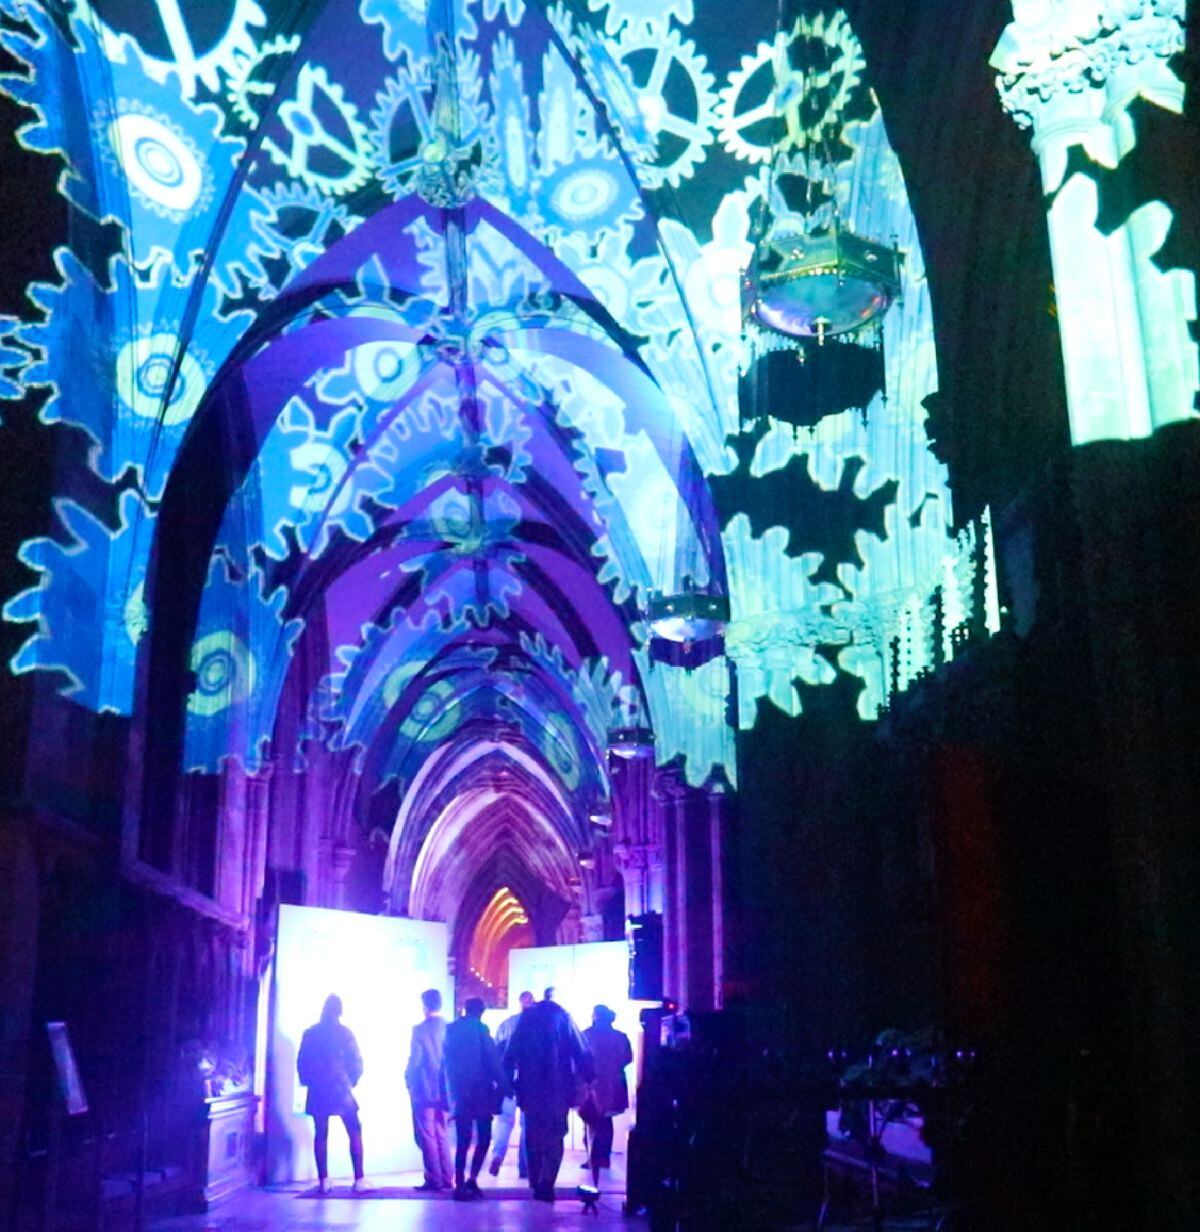 Images from projections inside Lichfield Cathedral